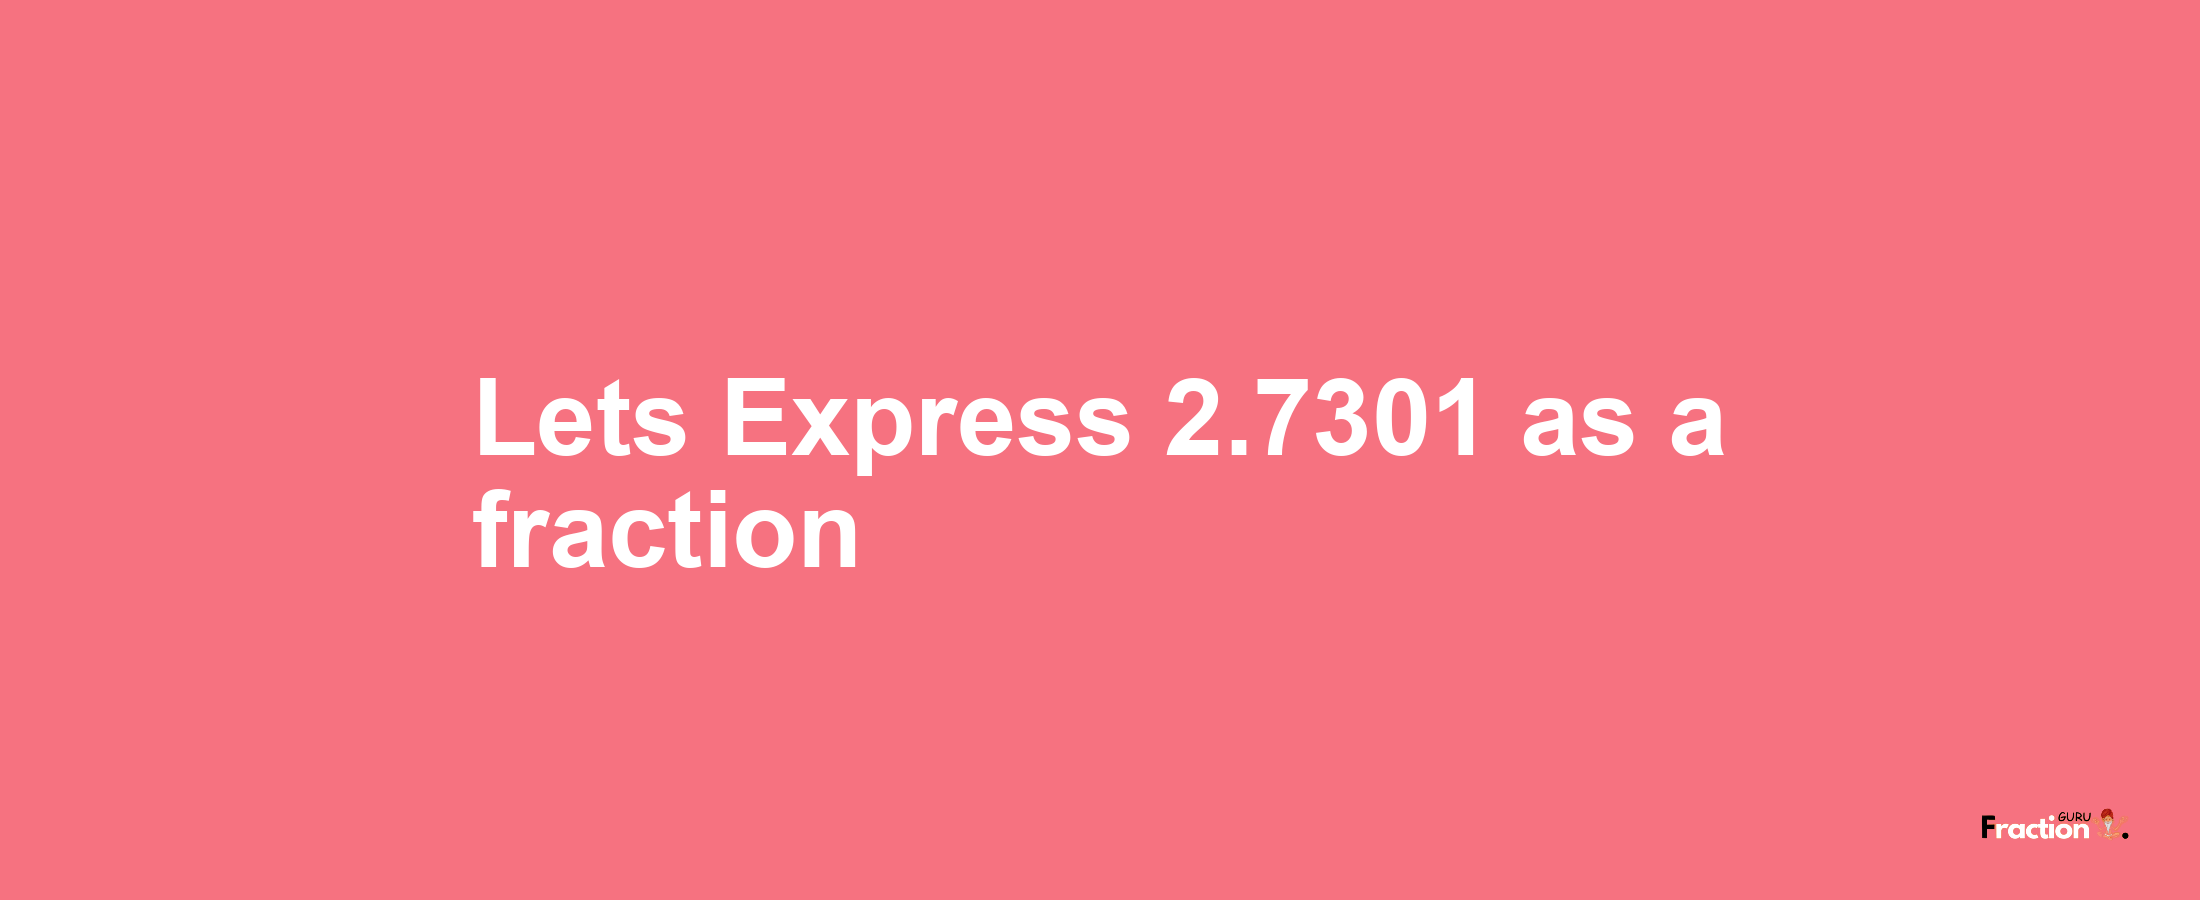 Lets Express 2.7301 as afraction